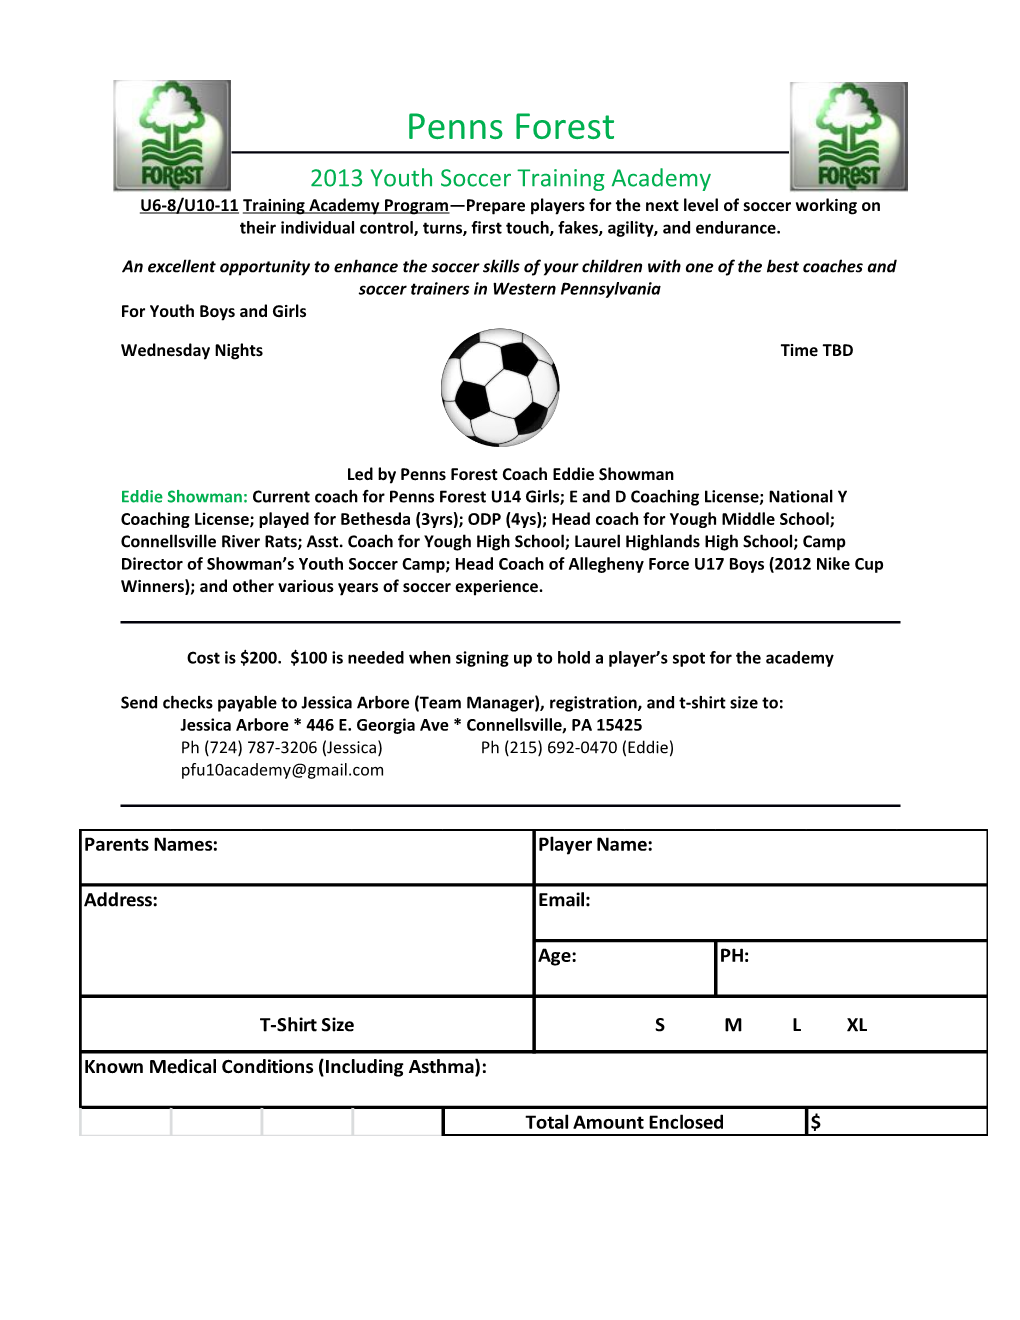 2013 Youth Soccer Training Academy